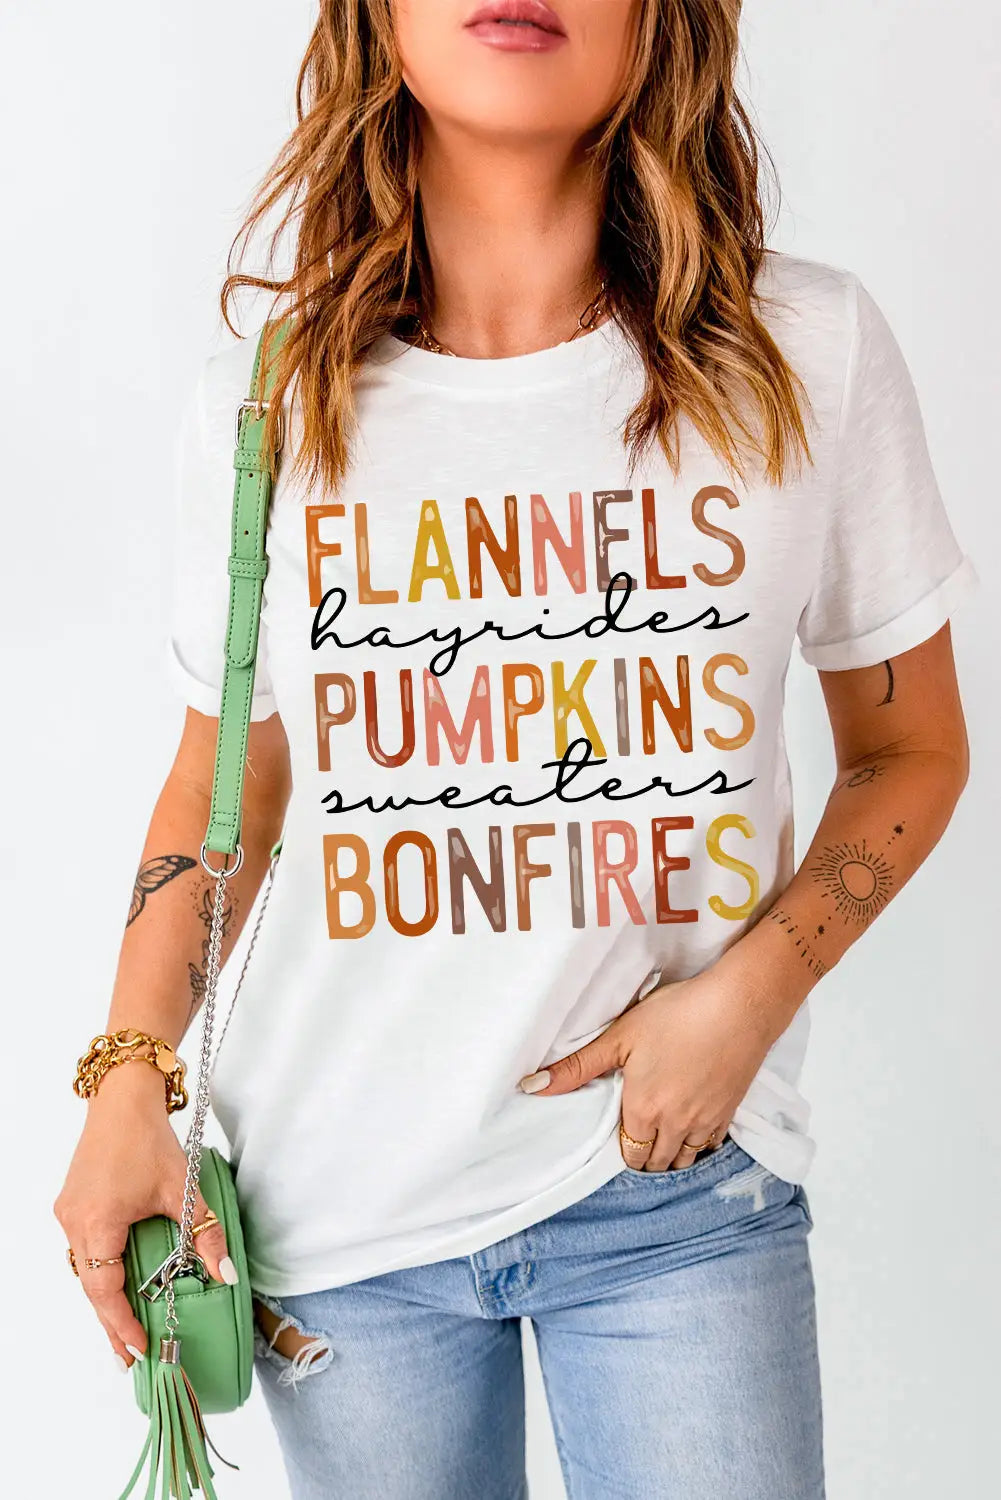 White flannels hayrides pumpkins sweaters bonfires graphic tee